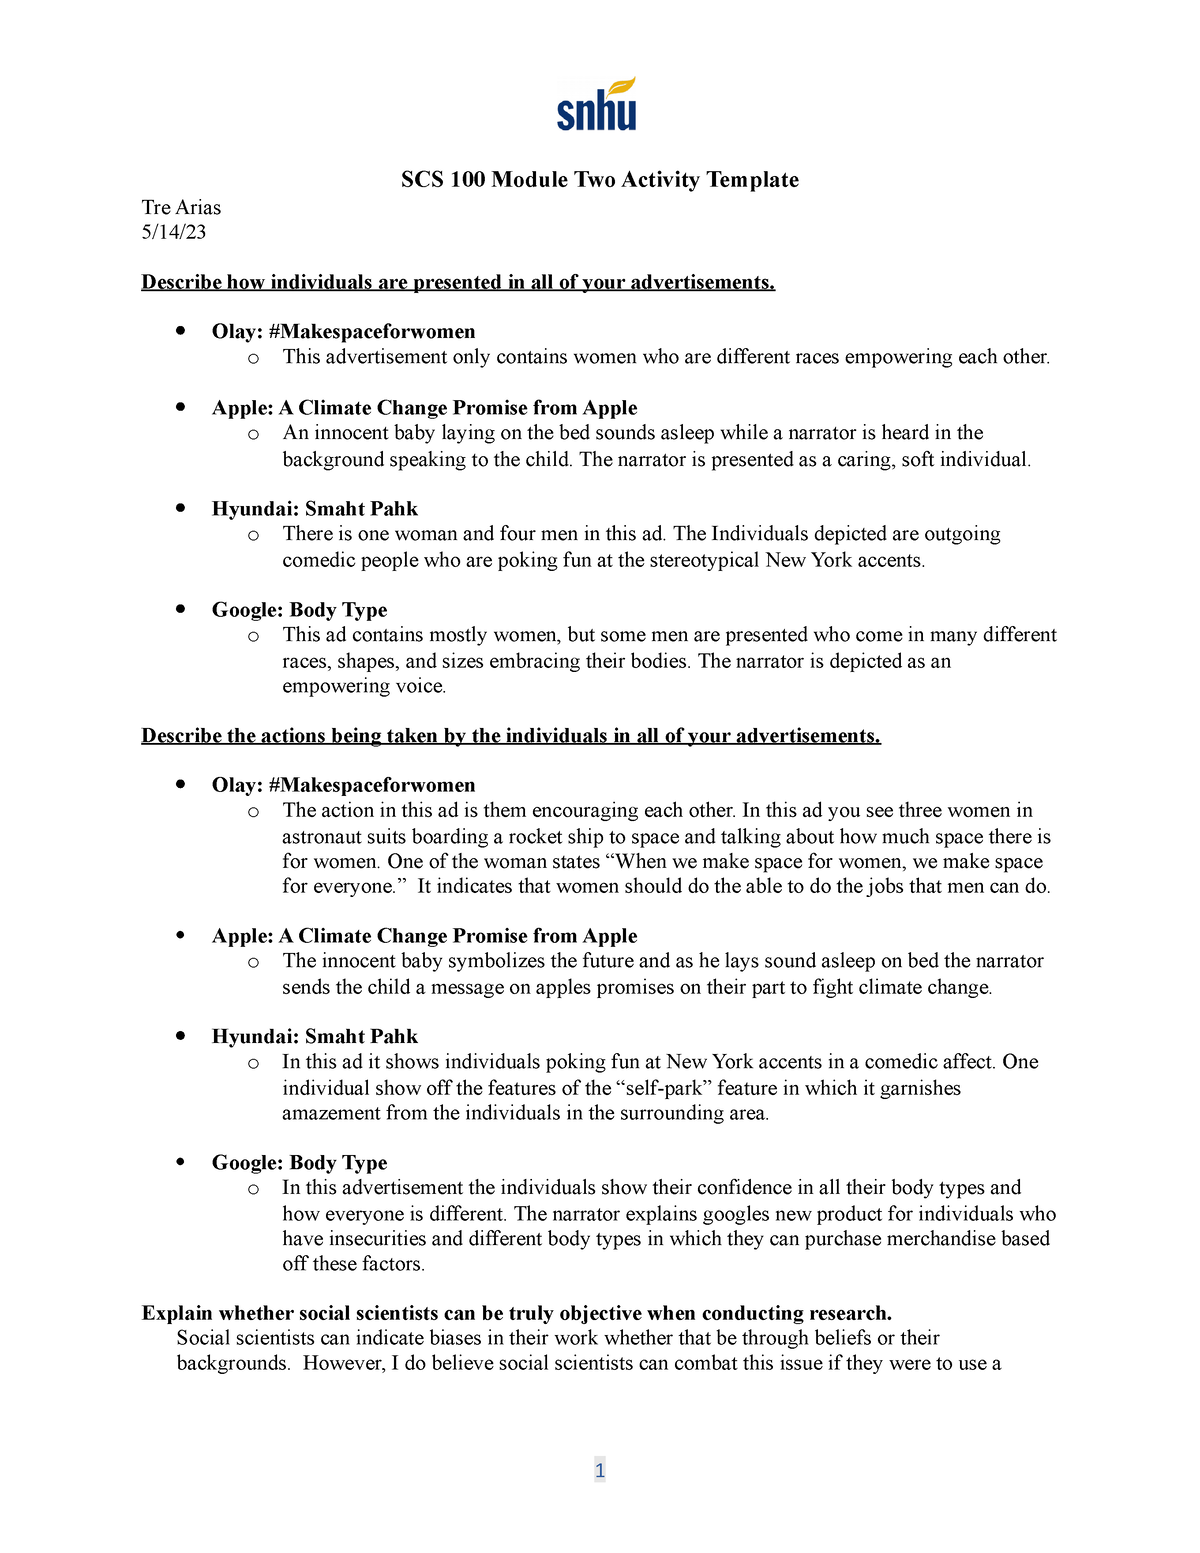 SCS 100 Module Two Activity Template SCS 100 Module Two Activity